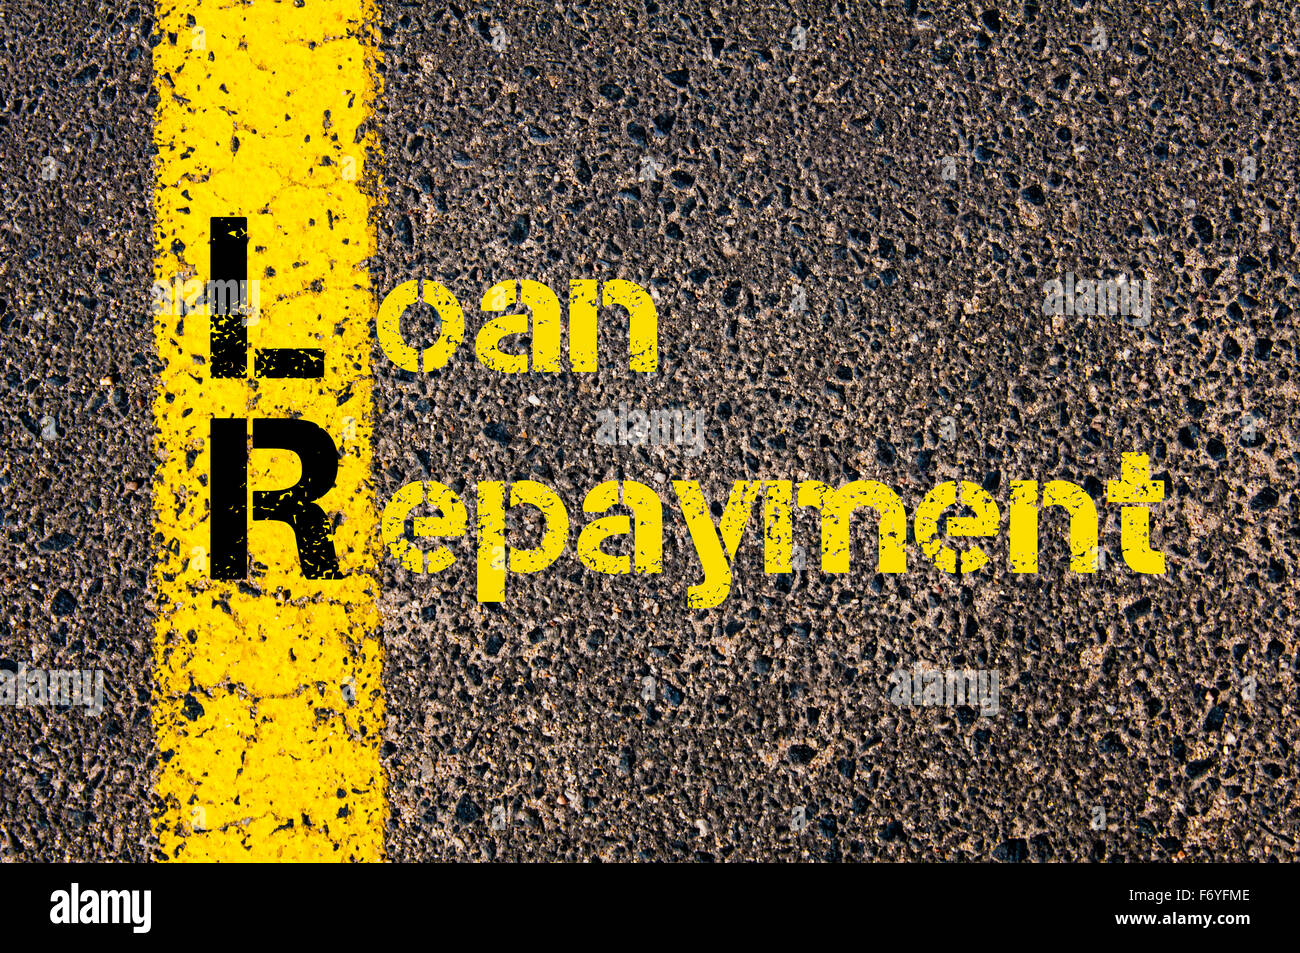 Concept image of Business Acronym LR as Loan Repayment written over road marking yellow paint line. Stock Photo